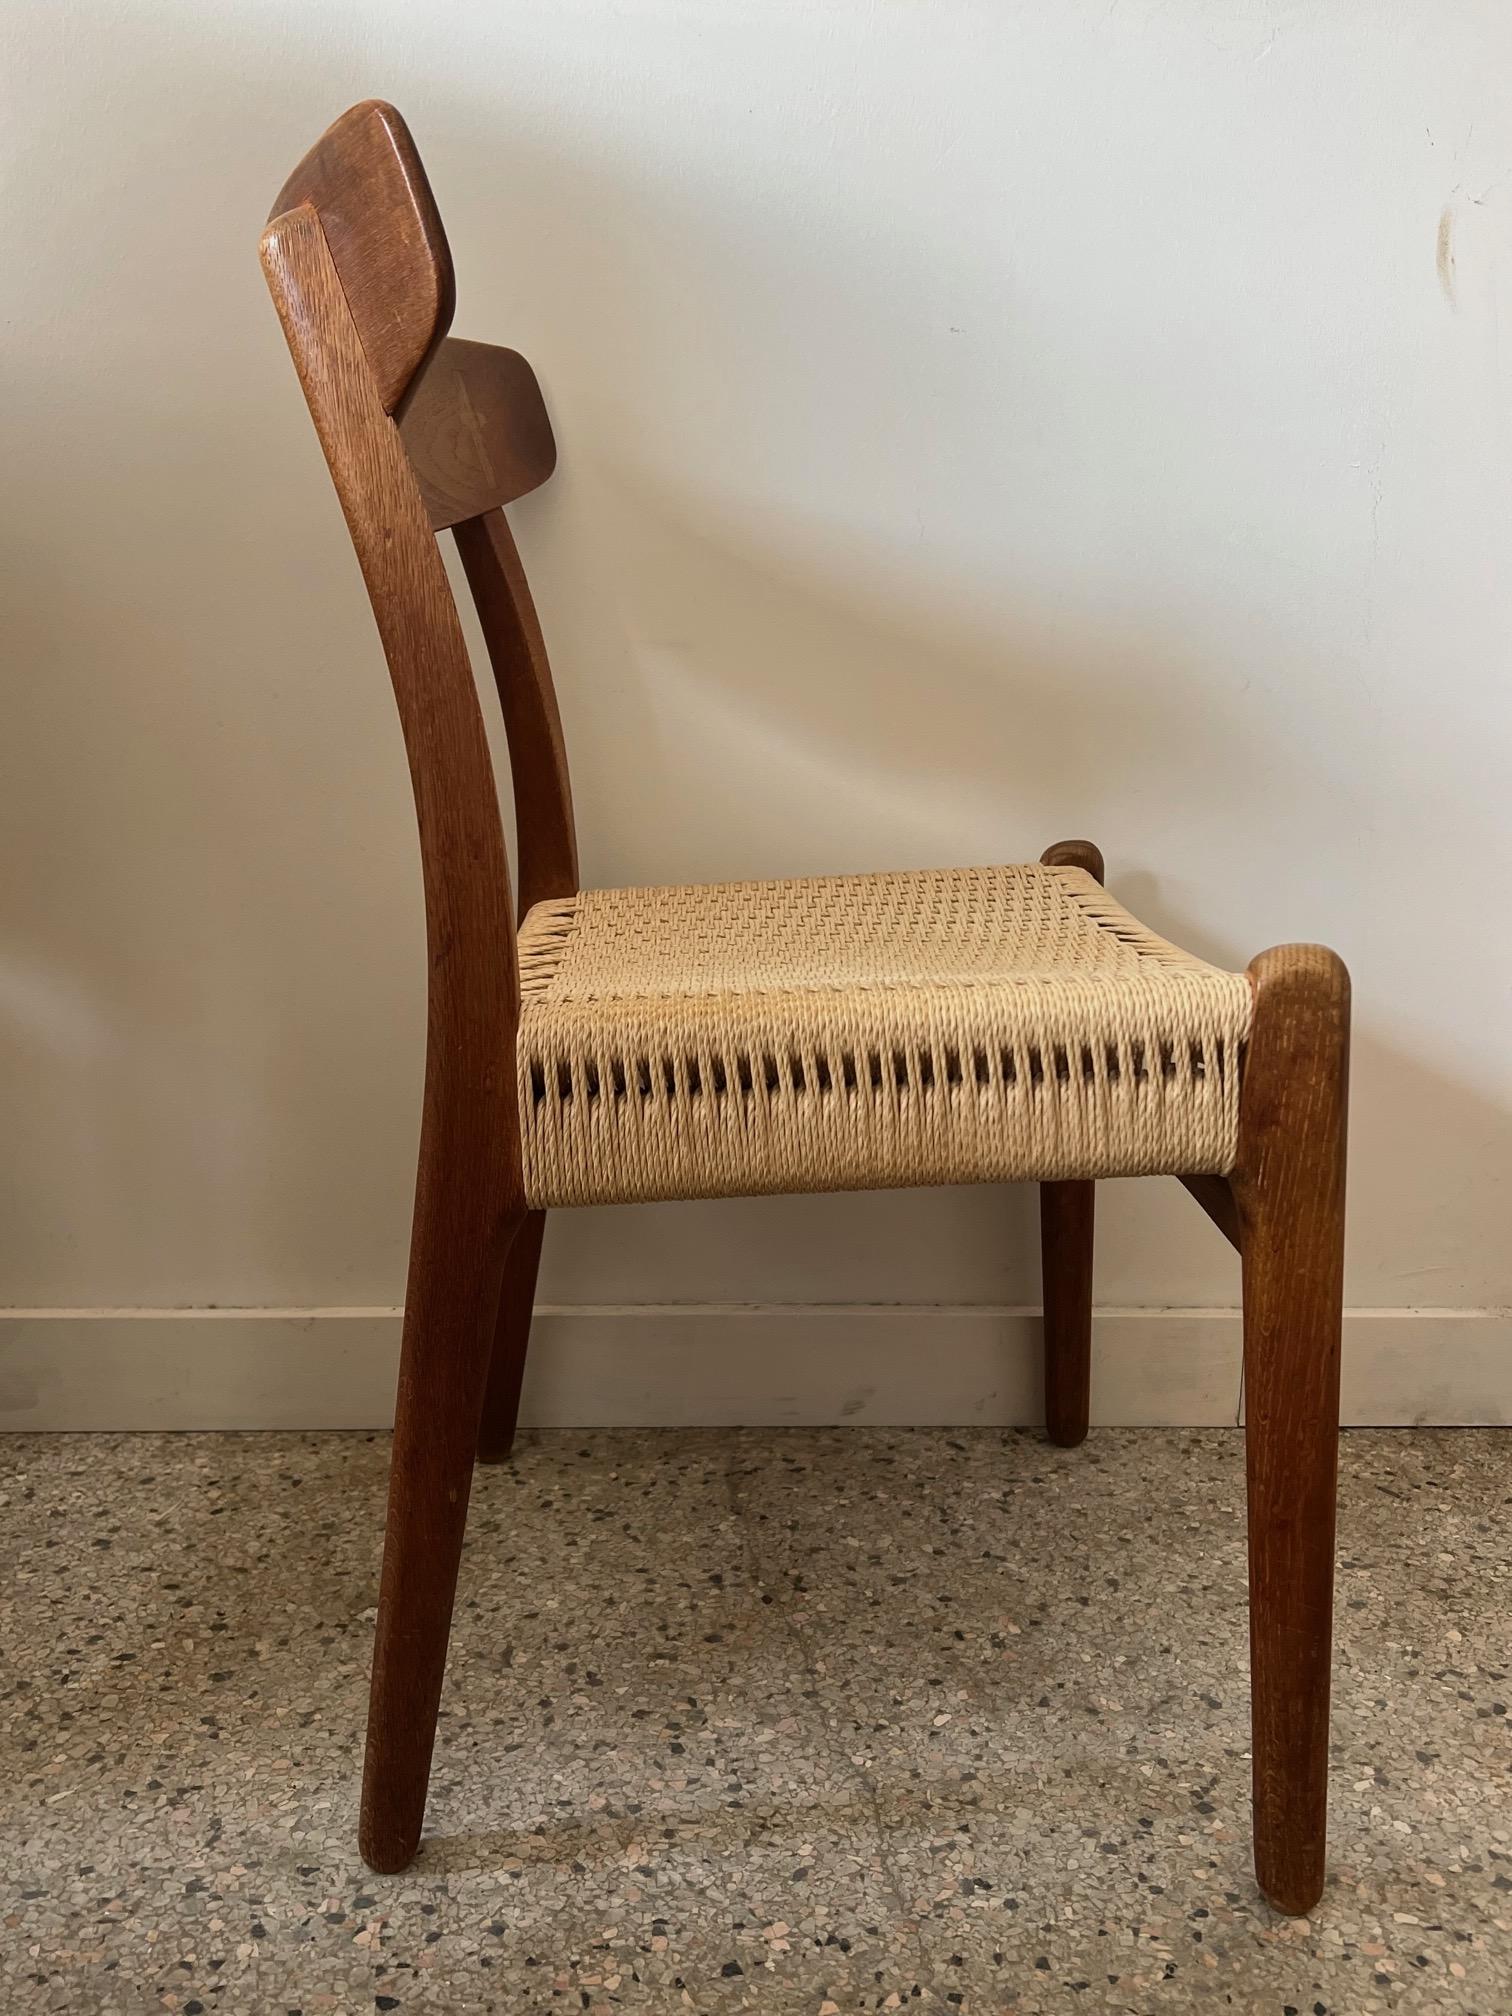 A Classic and beautiful, vintage Hans Wegner CH 23 chair made of teak and oak, with cord seat. Great patina and character which you cannot get with new chairs. Perfect as a desk chair or occasional chair. Manufactured by Odense, Denmark, circa 1960s.